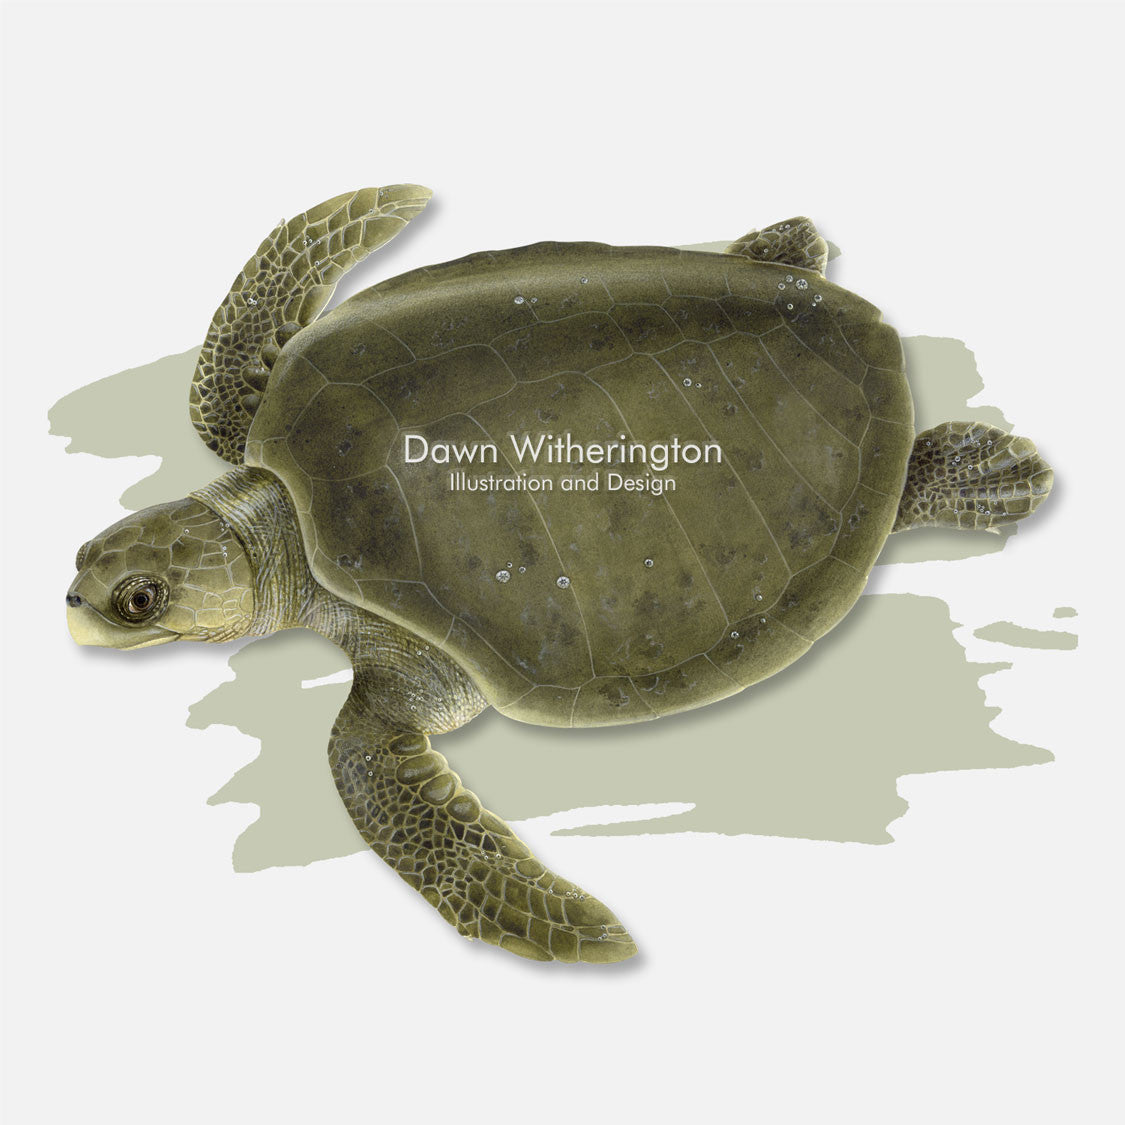 This beautiful illustration is of an olive ridley sea turtle, Lepidochelys olivacea, over a swash graphic. 